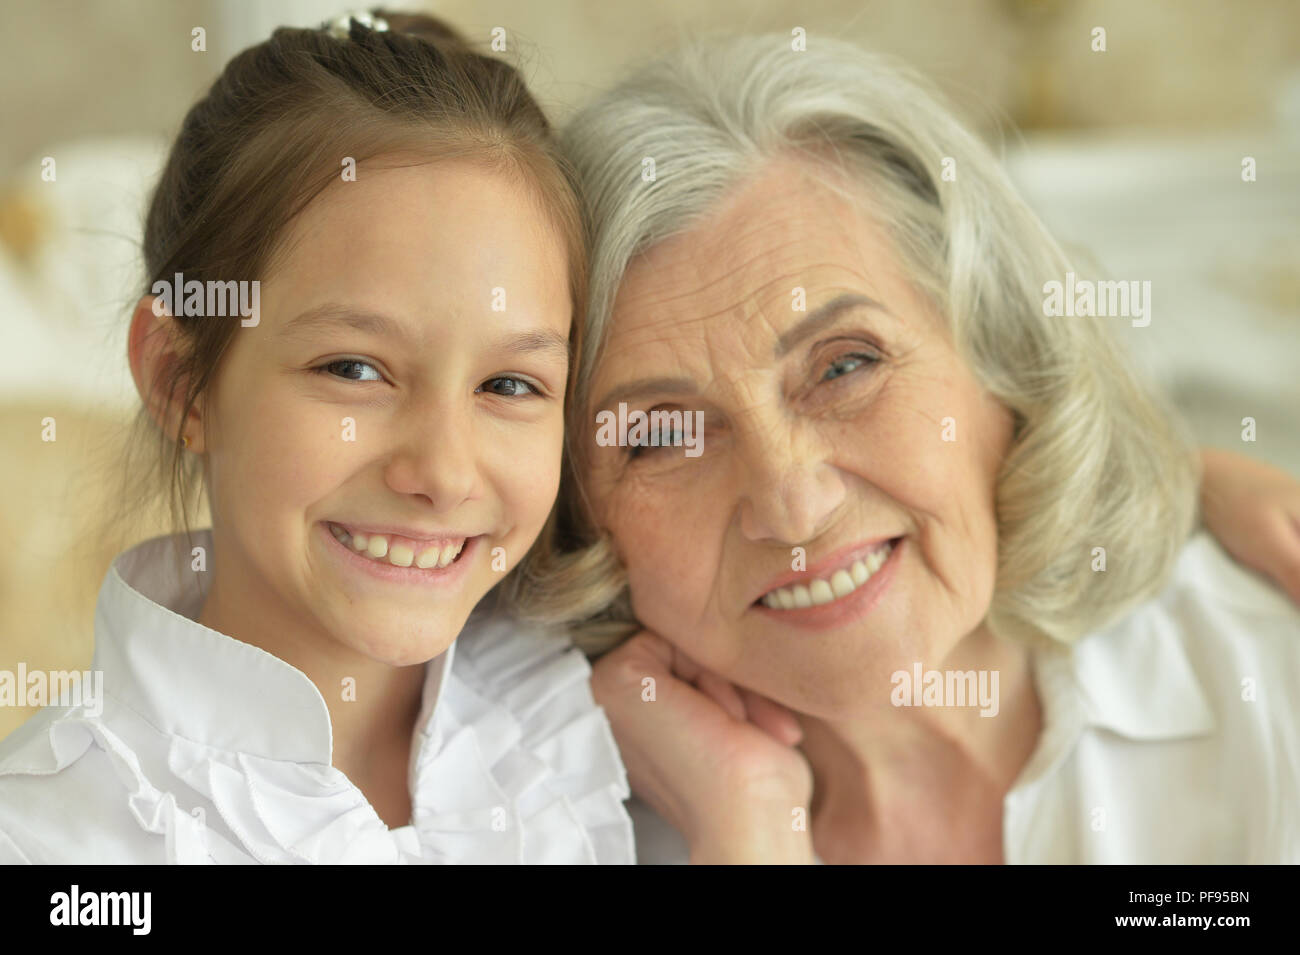 Portrait of a grandmother and granddaughter posing Stock Photo